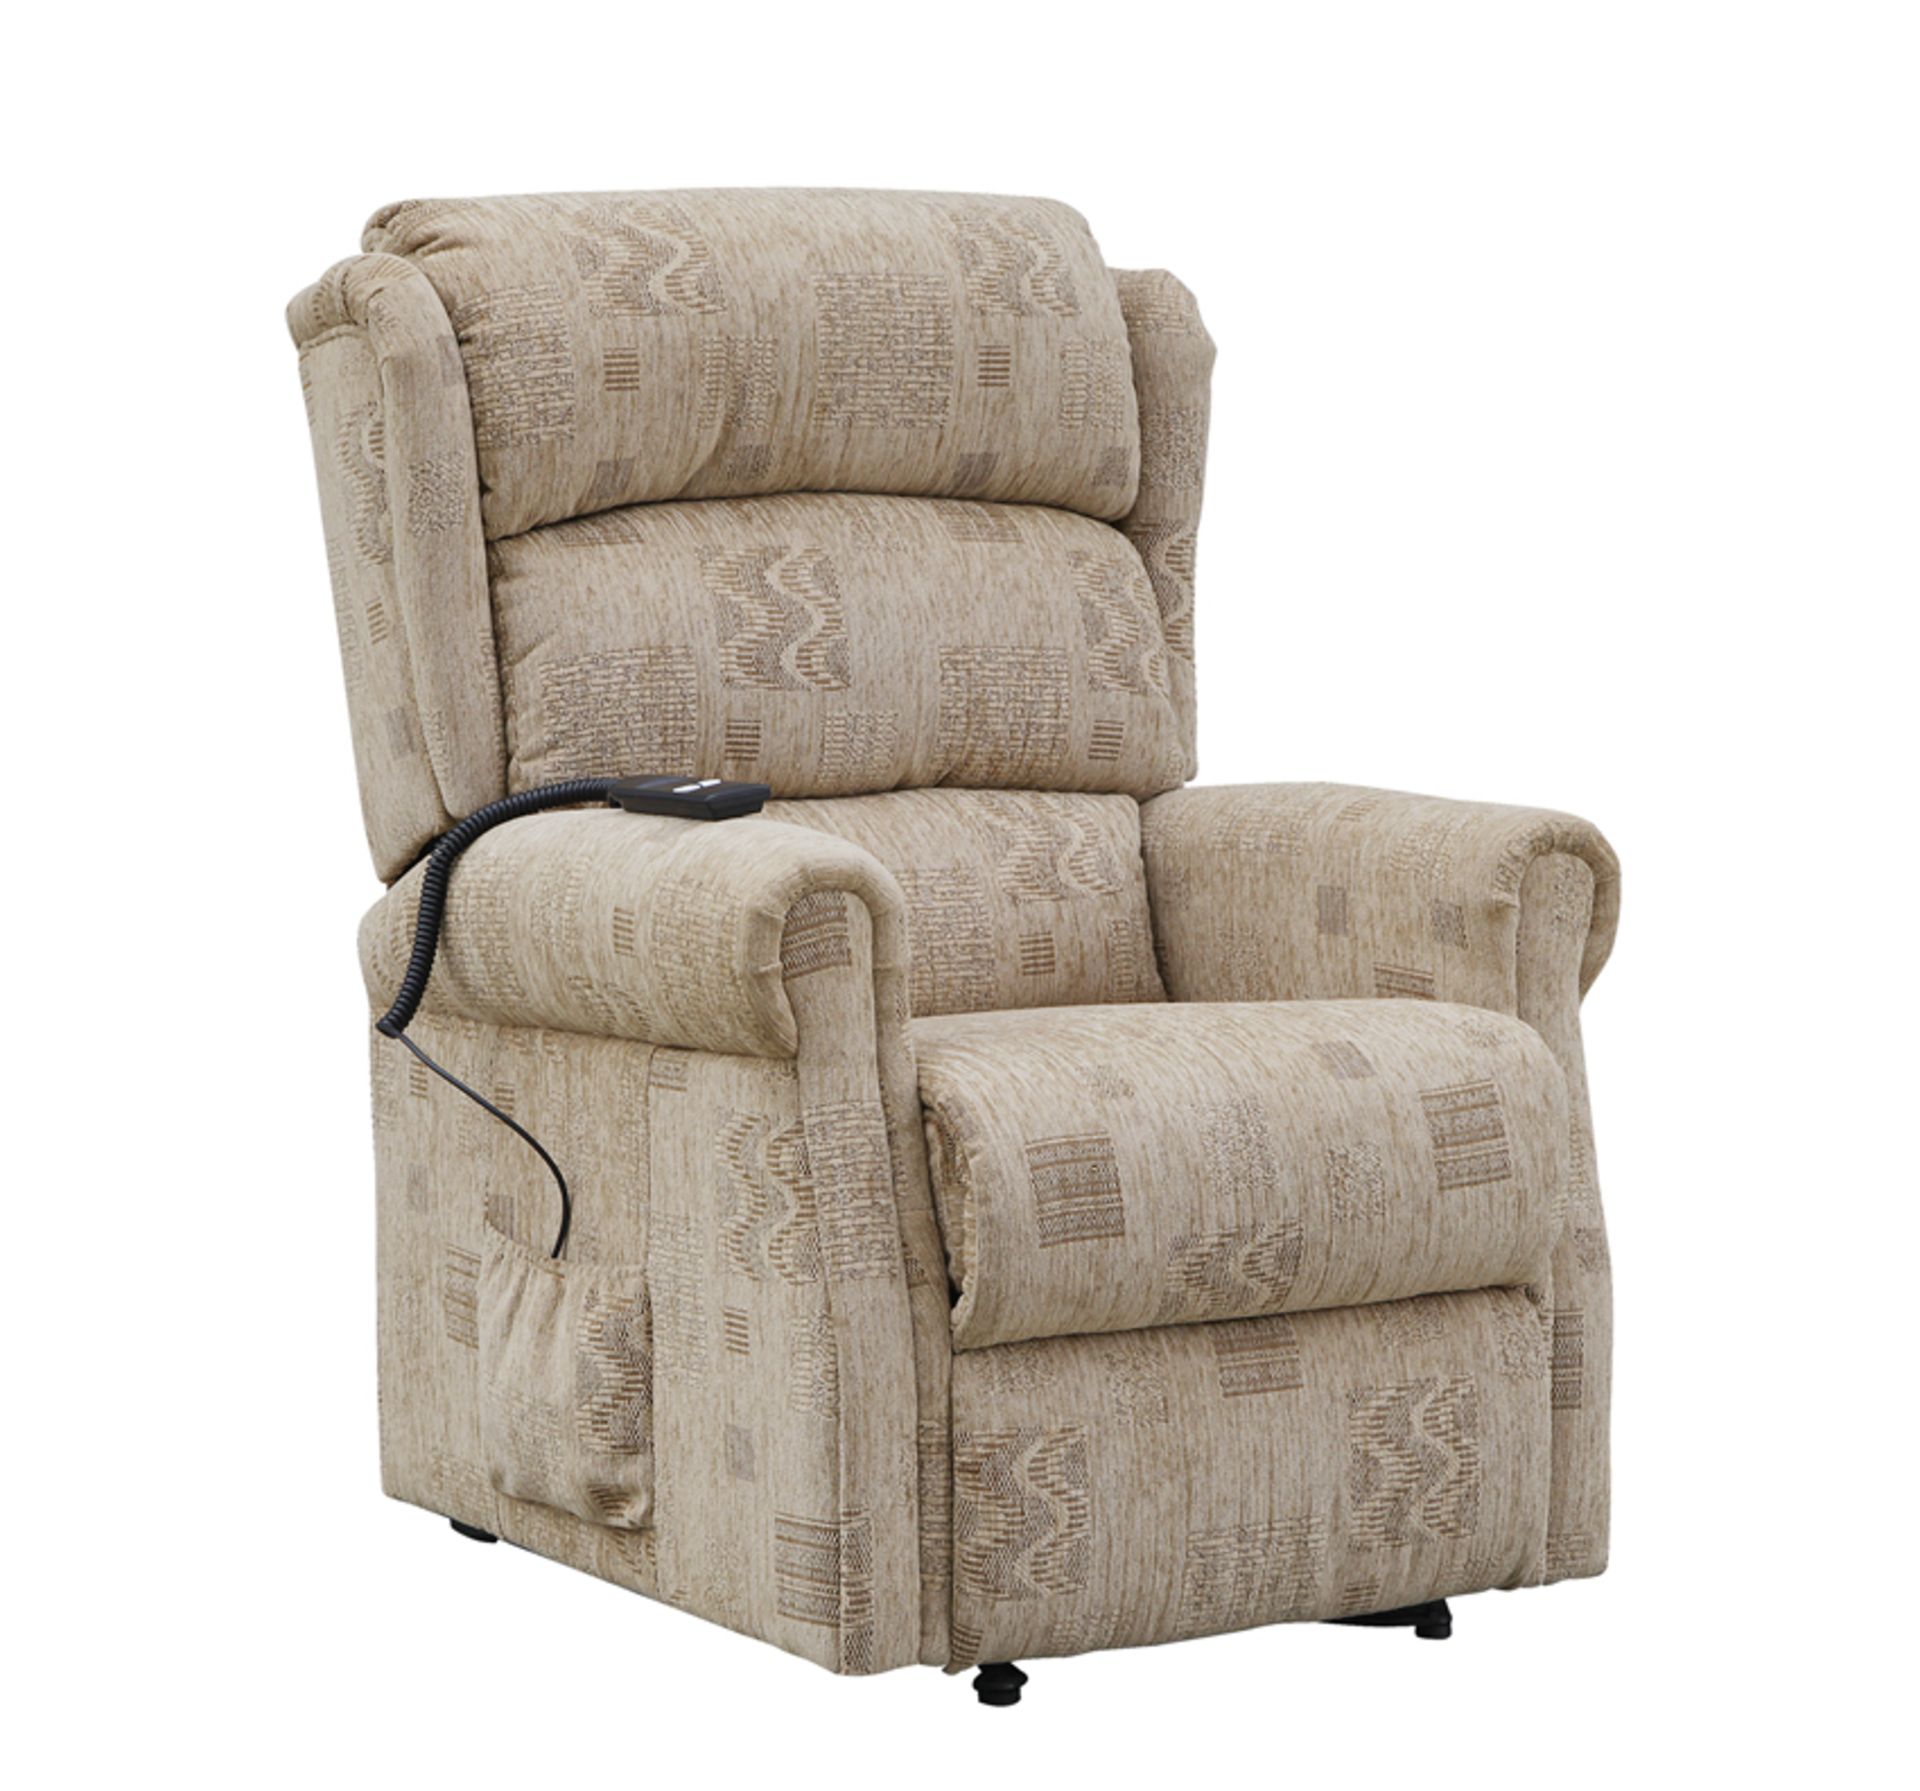 Brand New Boxed Cambridge Fabric Electric Rise And Recliner Chair In Soho Patchwork Oatmealæ - Image 2 of 2